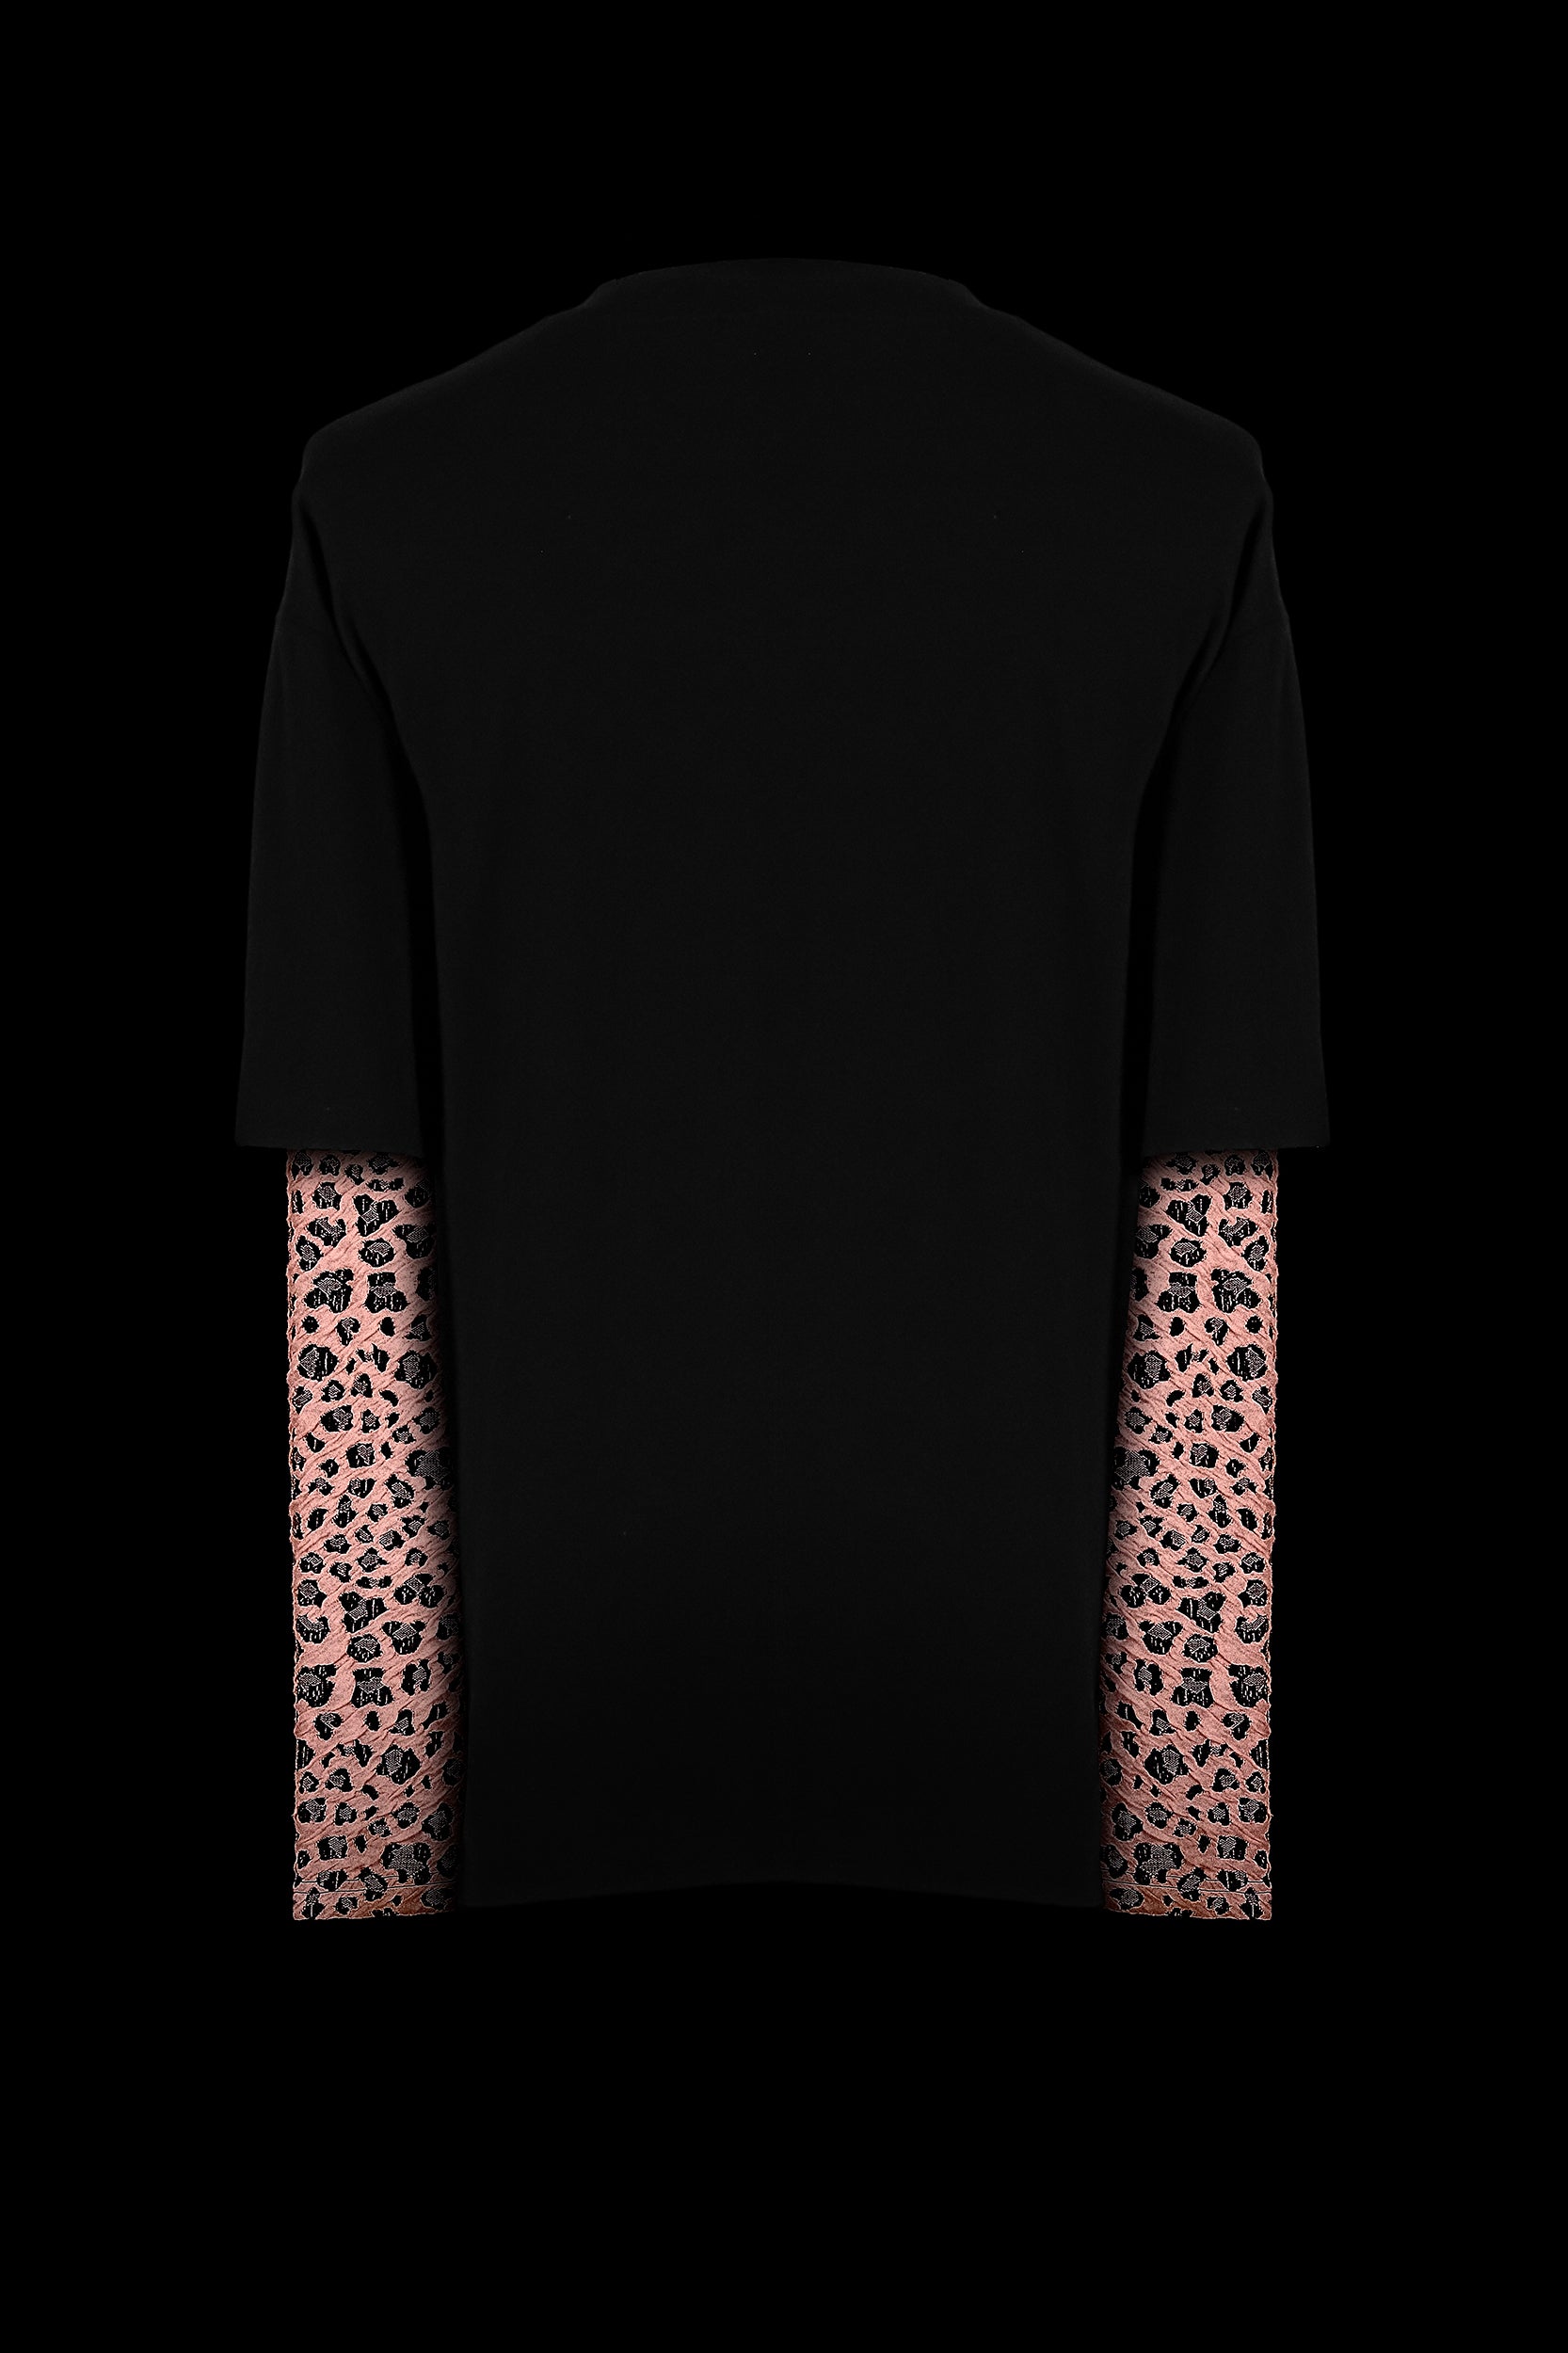 The Layered T-Shirt with Jacquard Knit Fitted Pink Leopard Long Sleeves